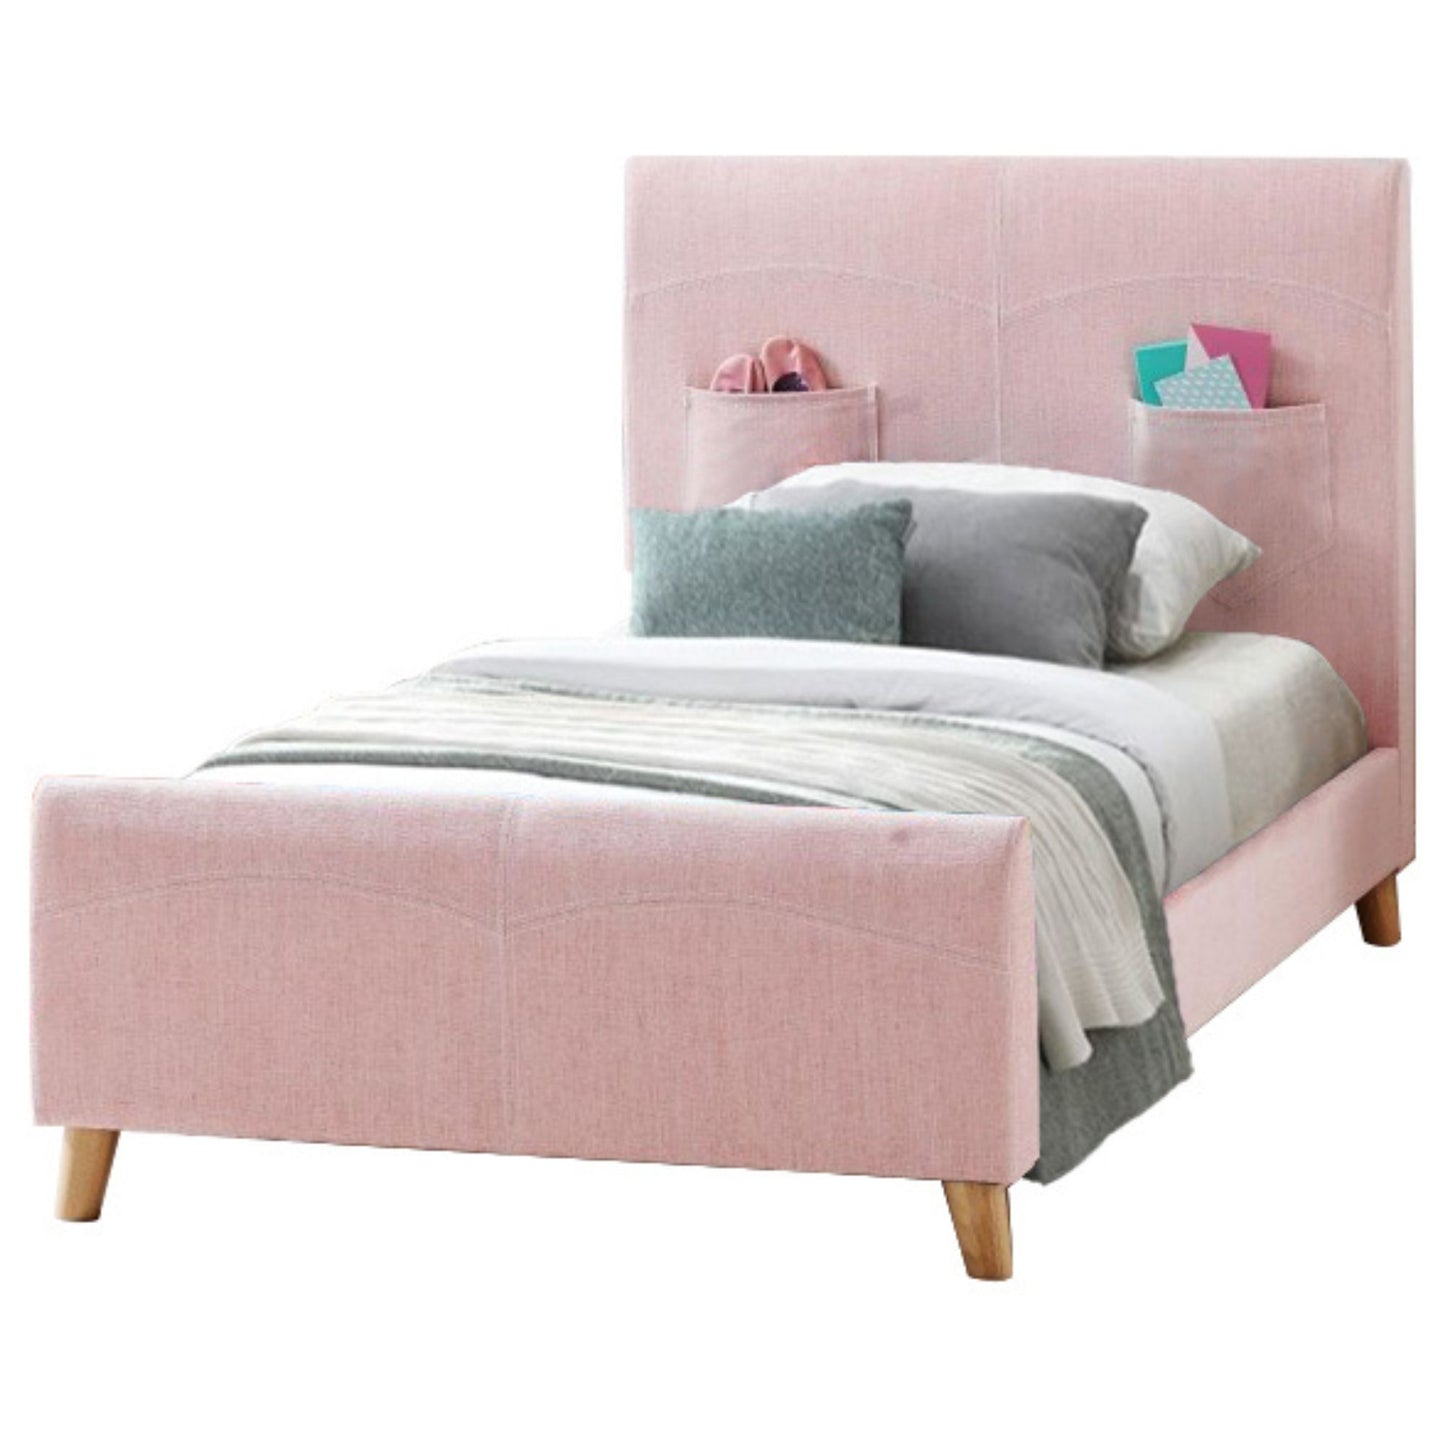 Phlox Kids Single Bed Fabric Upholstered Bed Frame - Pink